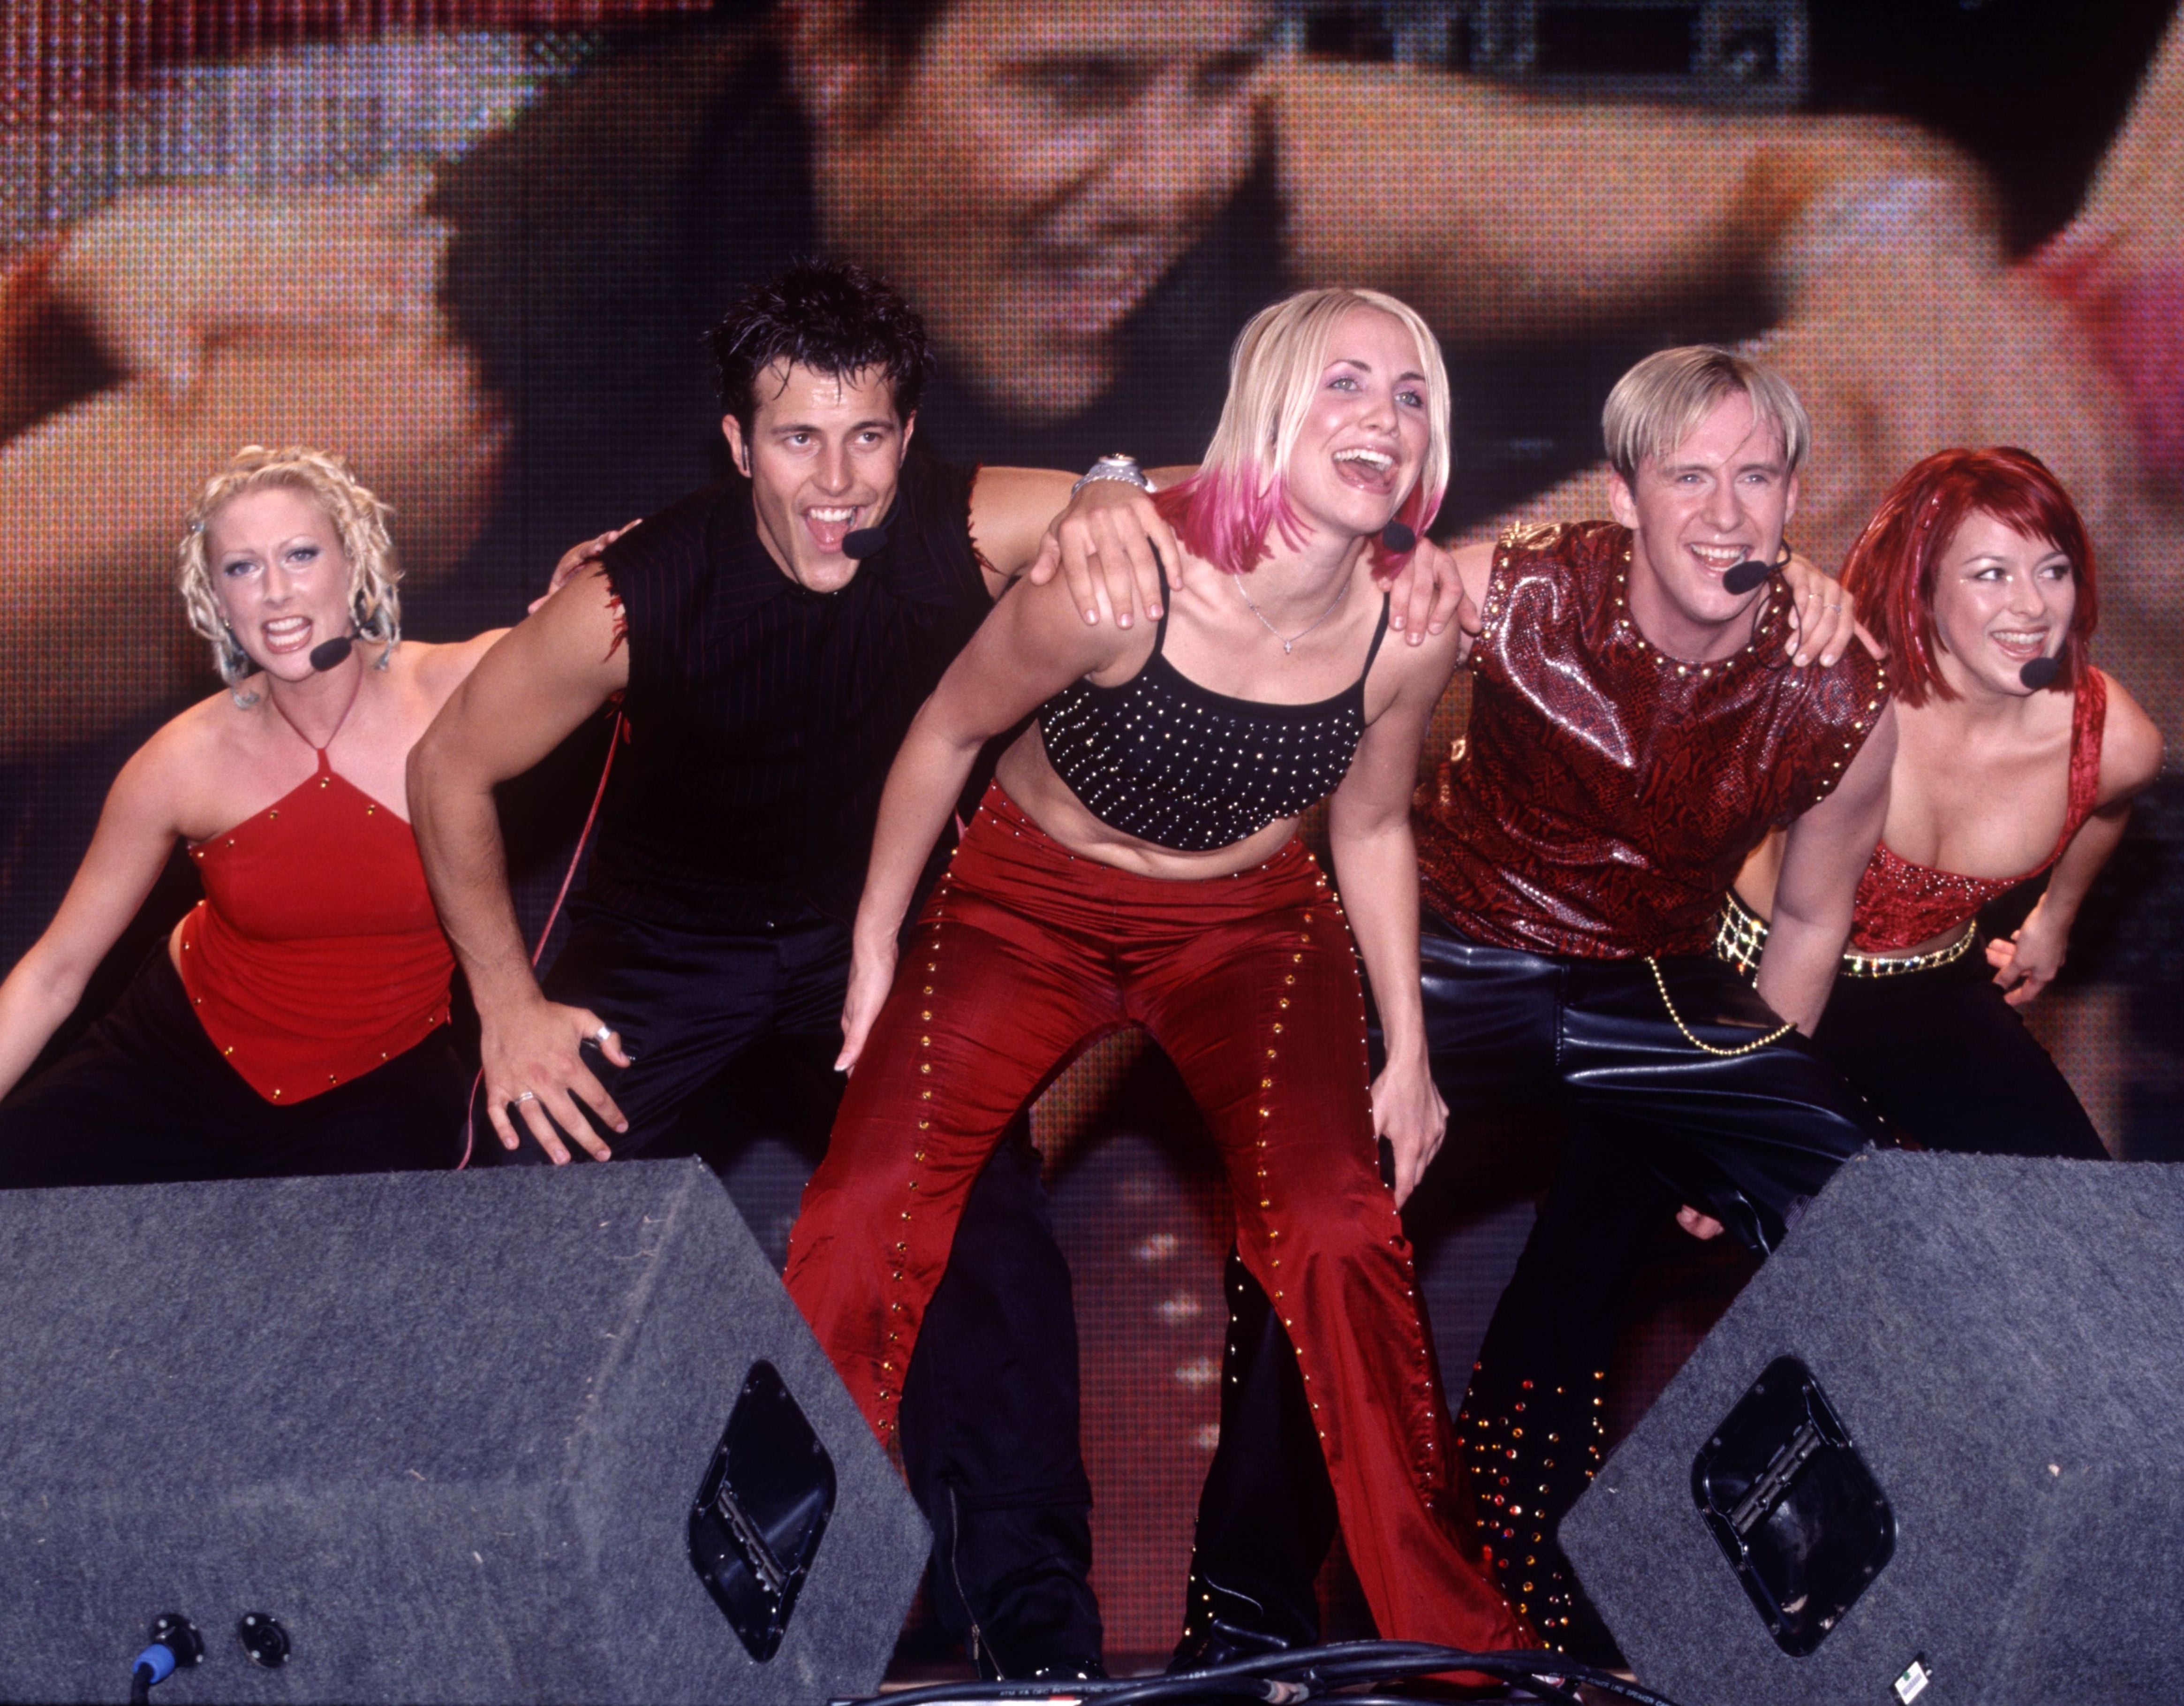 ‘All Saints and Five and S Club 7 would be all dripping in designer, whereas we’d be there in our same little sad red-and-black top’